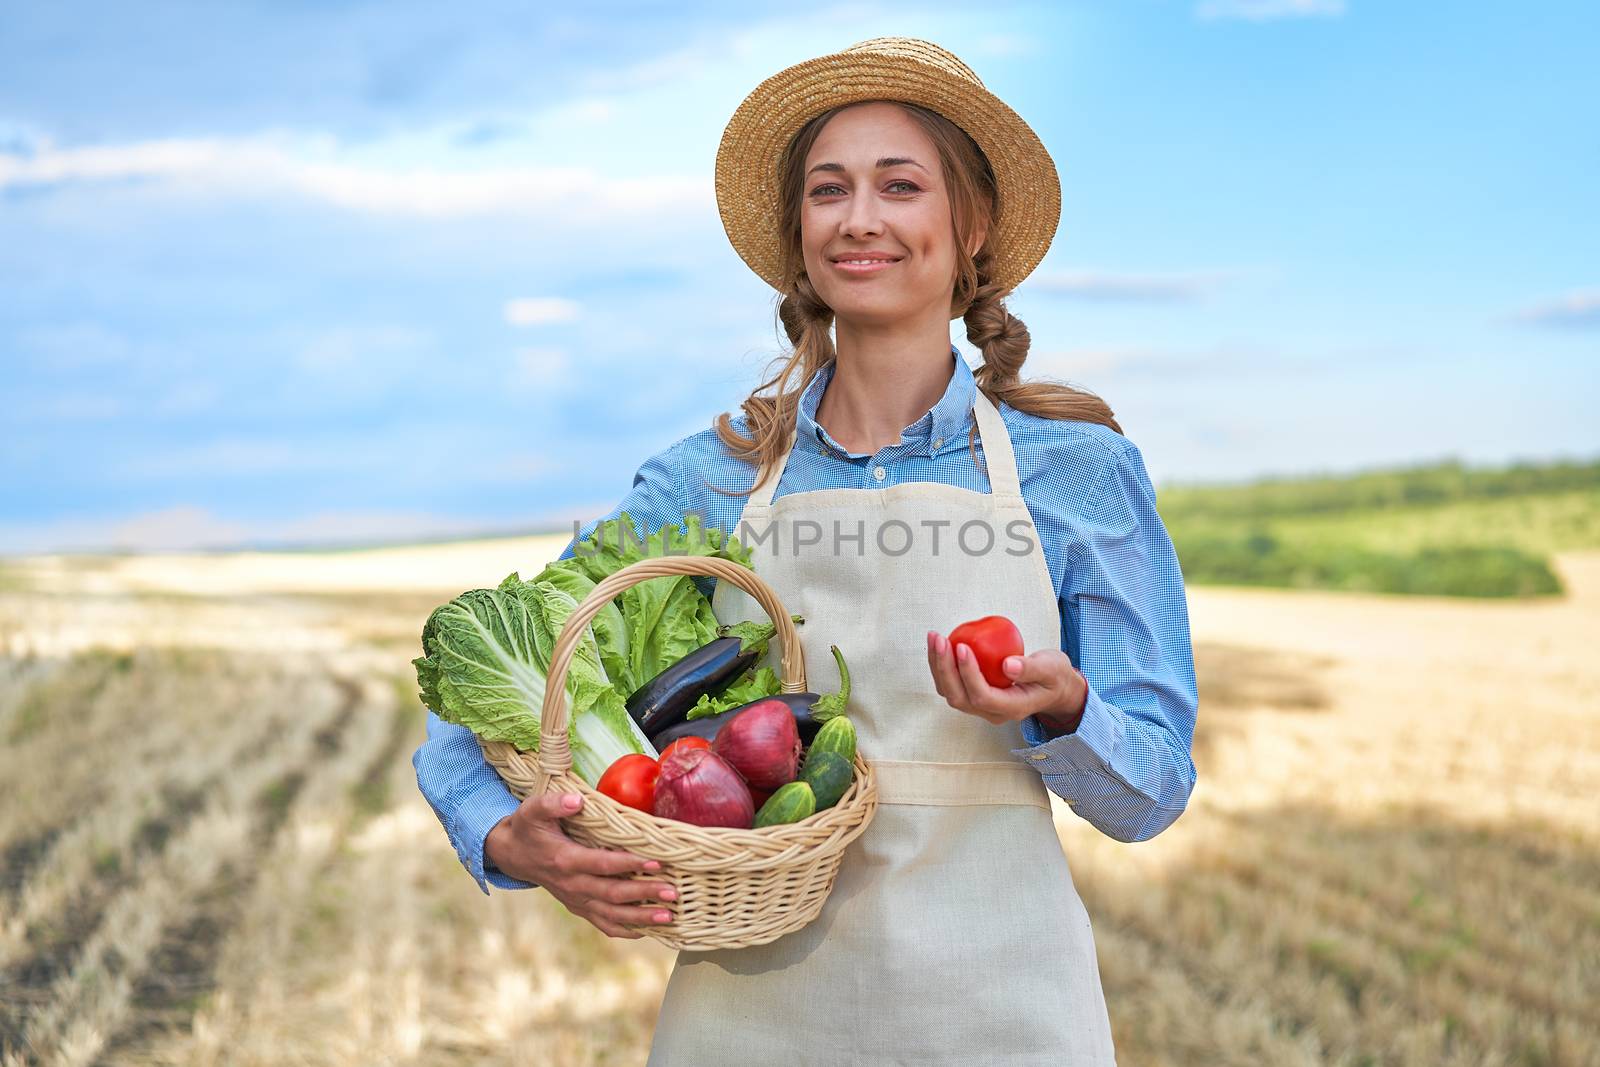 Woman farmer straw hat apron standing farmland smiling Female agronomist specialist farming agribusiness Happy positive caucasian worker agricultural field by andreonegin